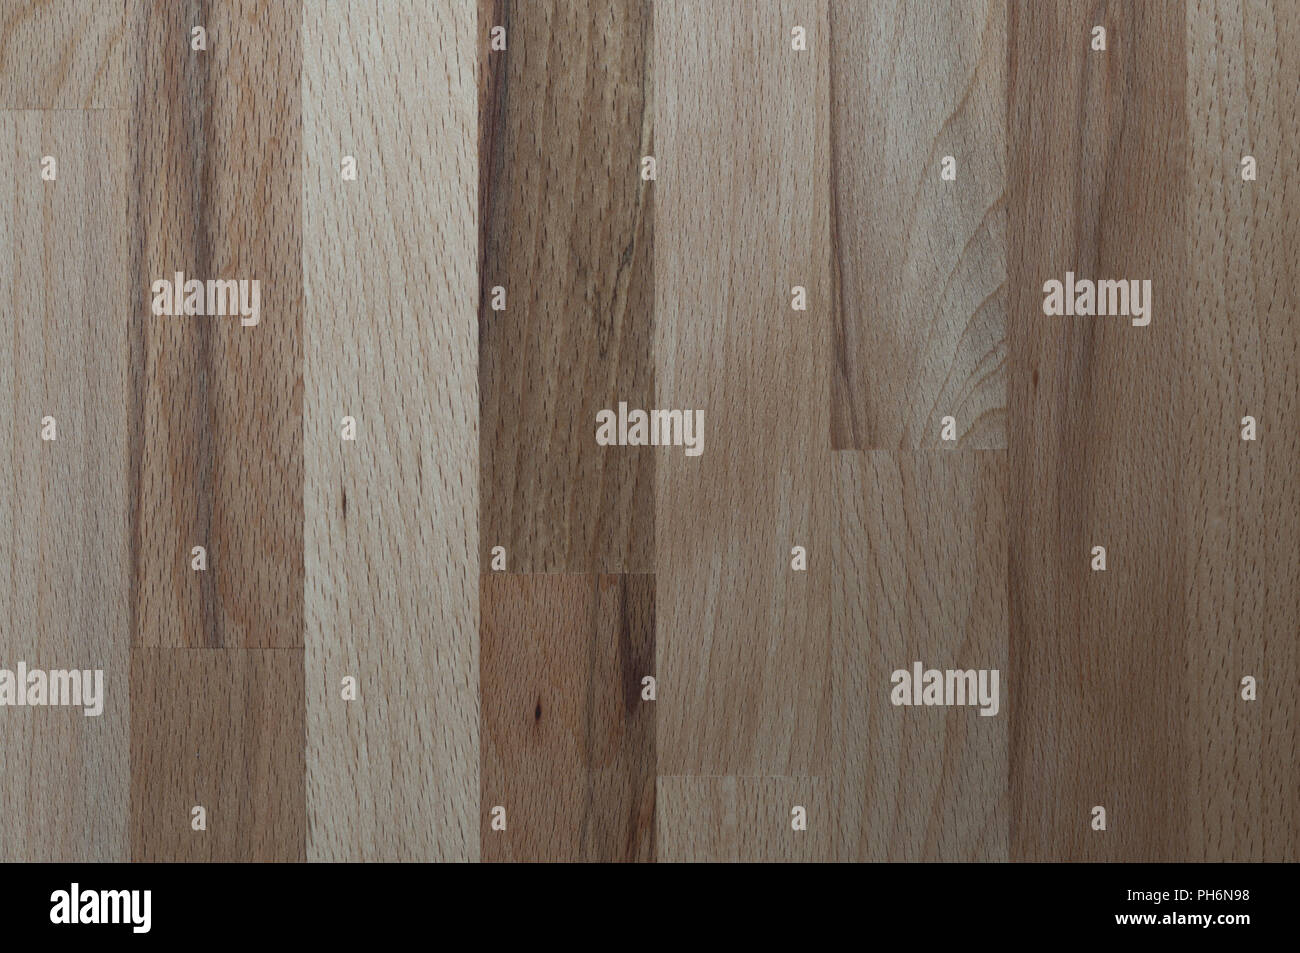 Background, wood structure of a cherry wood panel. Stock Photo